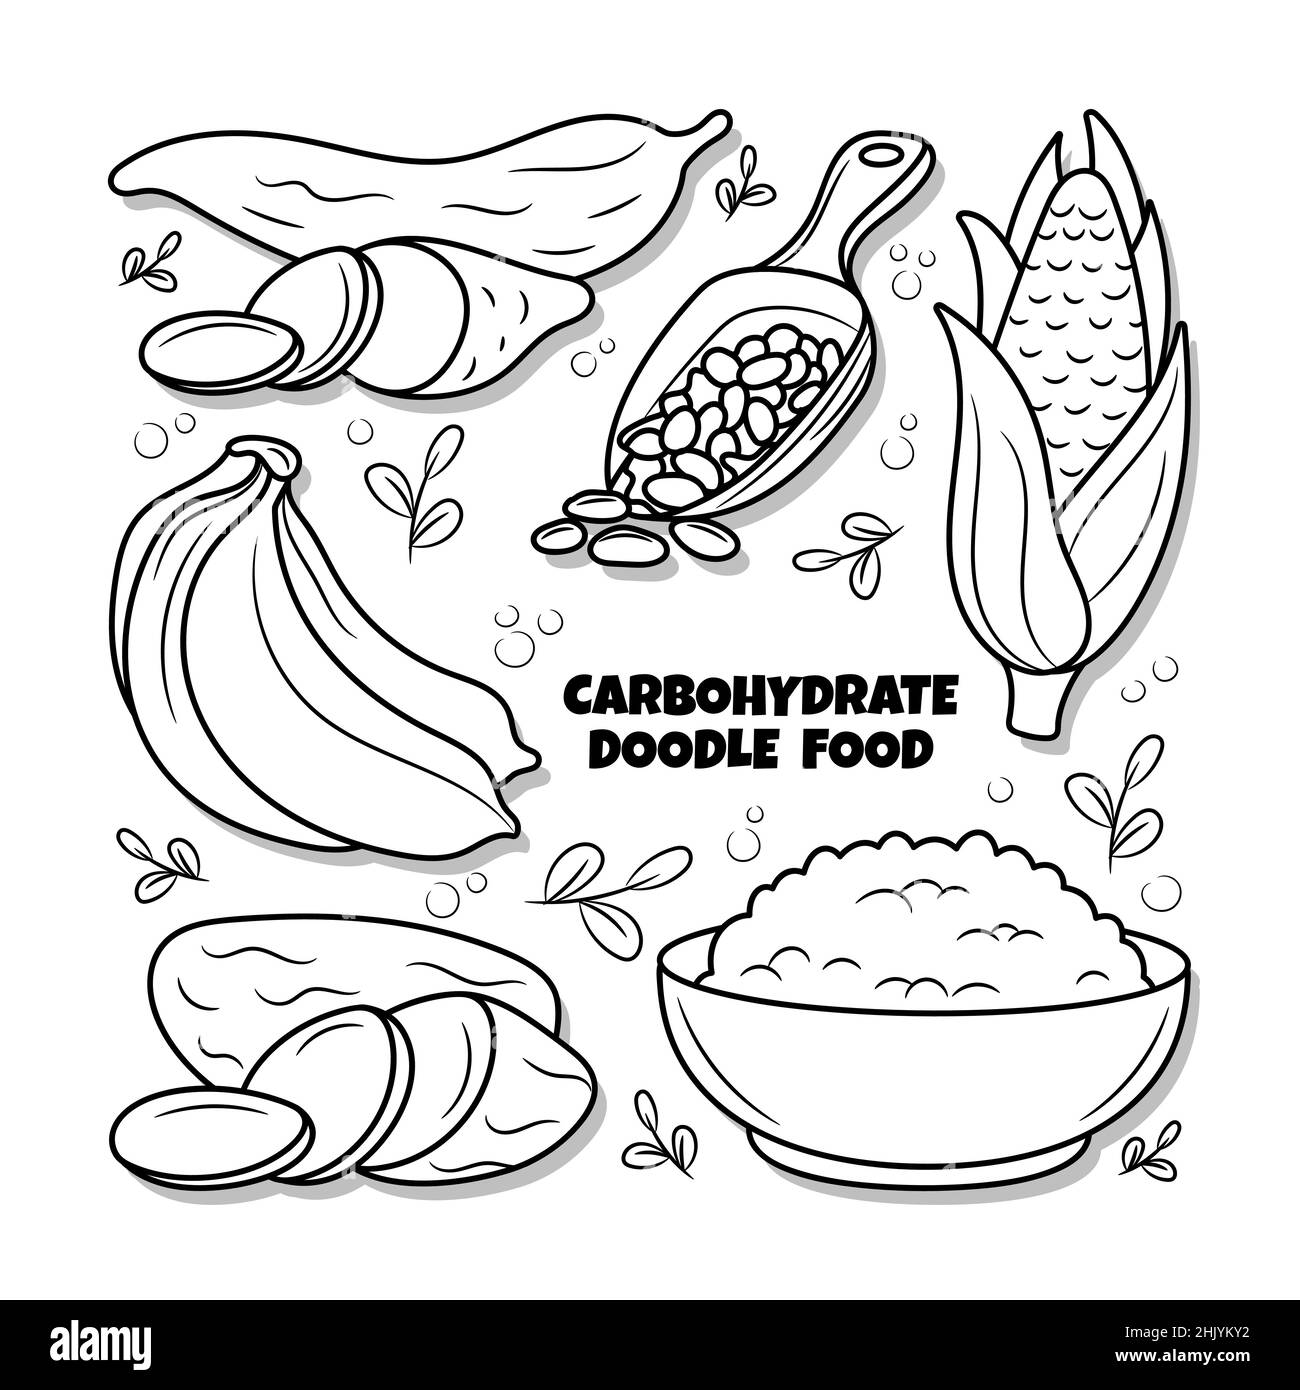 Carbohydrate food element set with hand drawn outline illustration Stock Vector